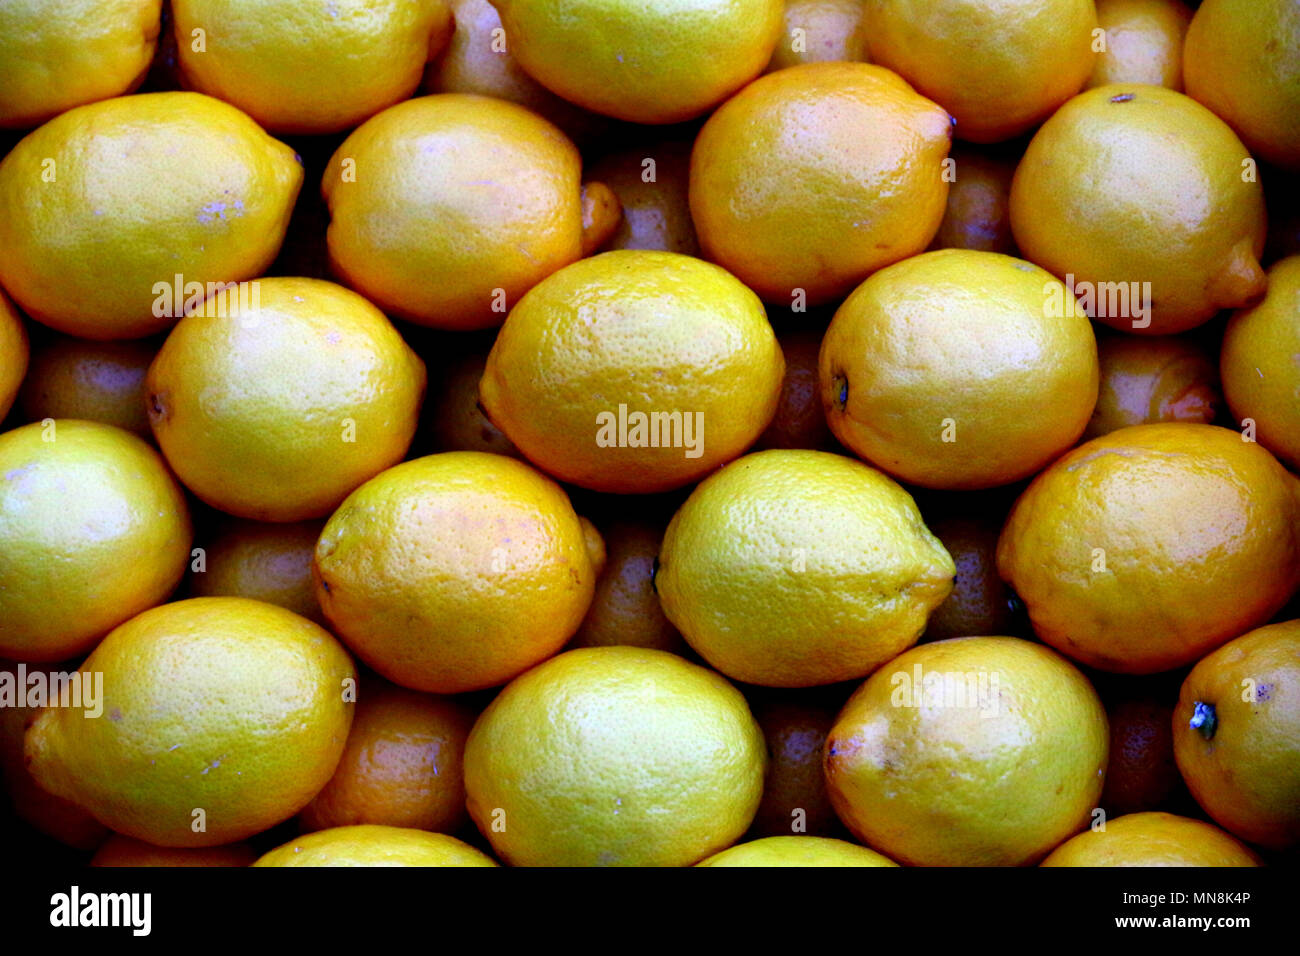 Group of fresh greek lemon from the marketplace. Healthy and full of vitamin C. Stock Photo